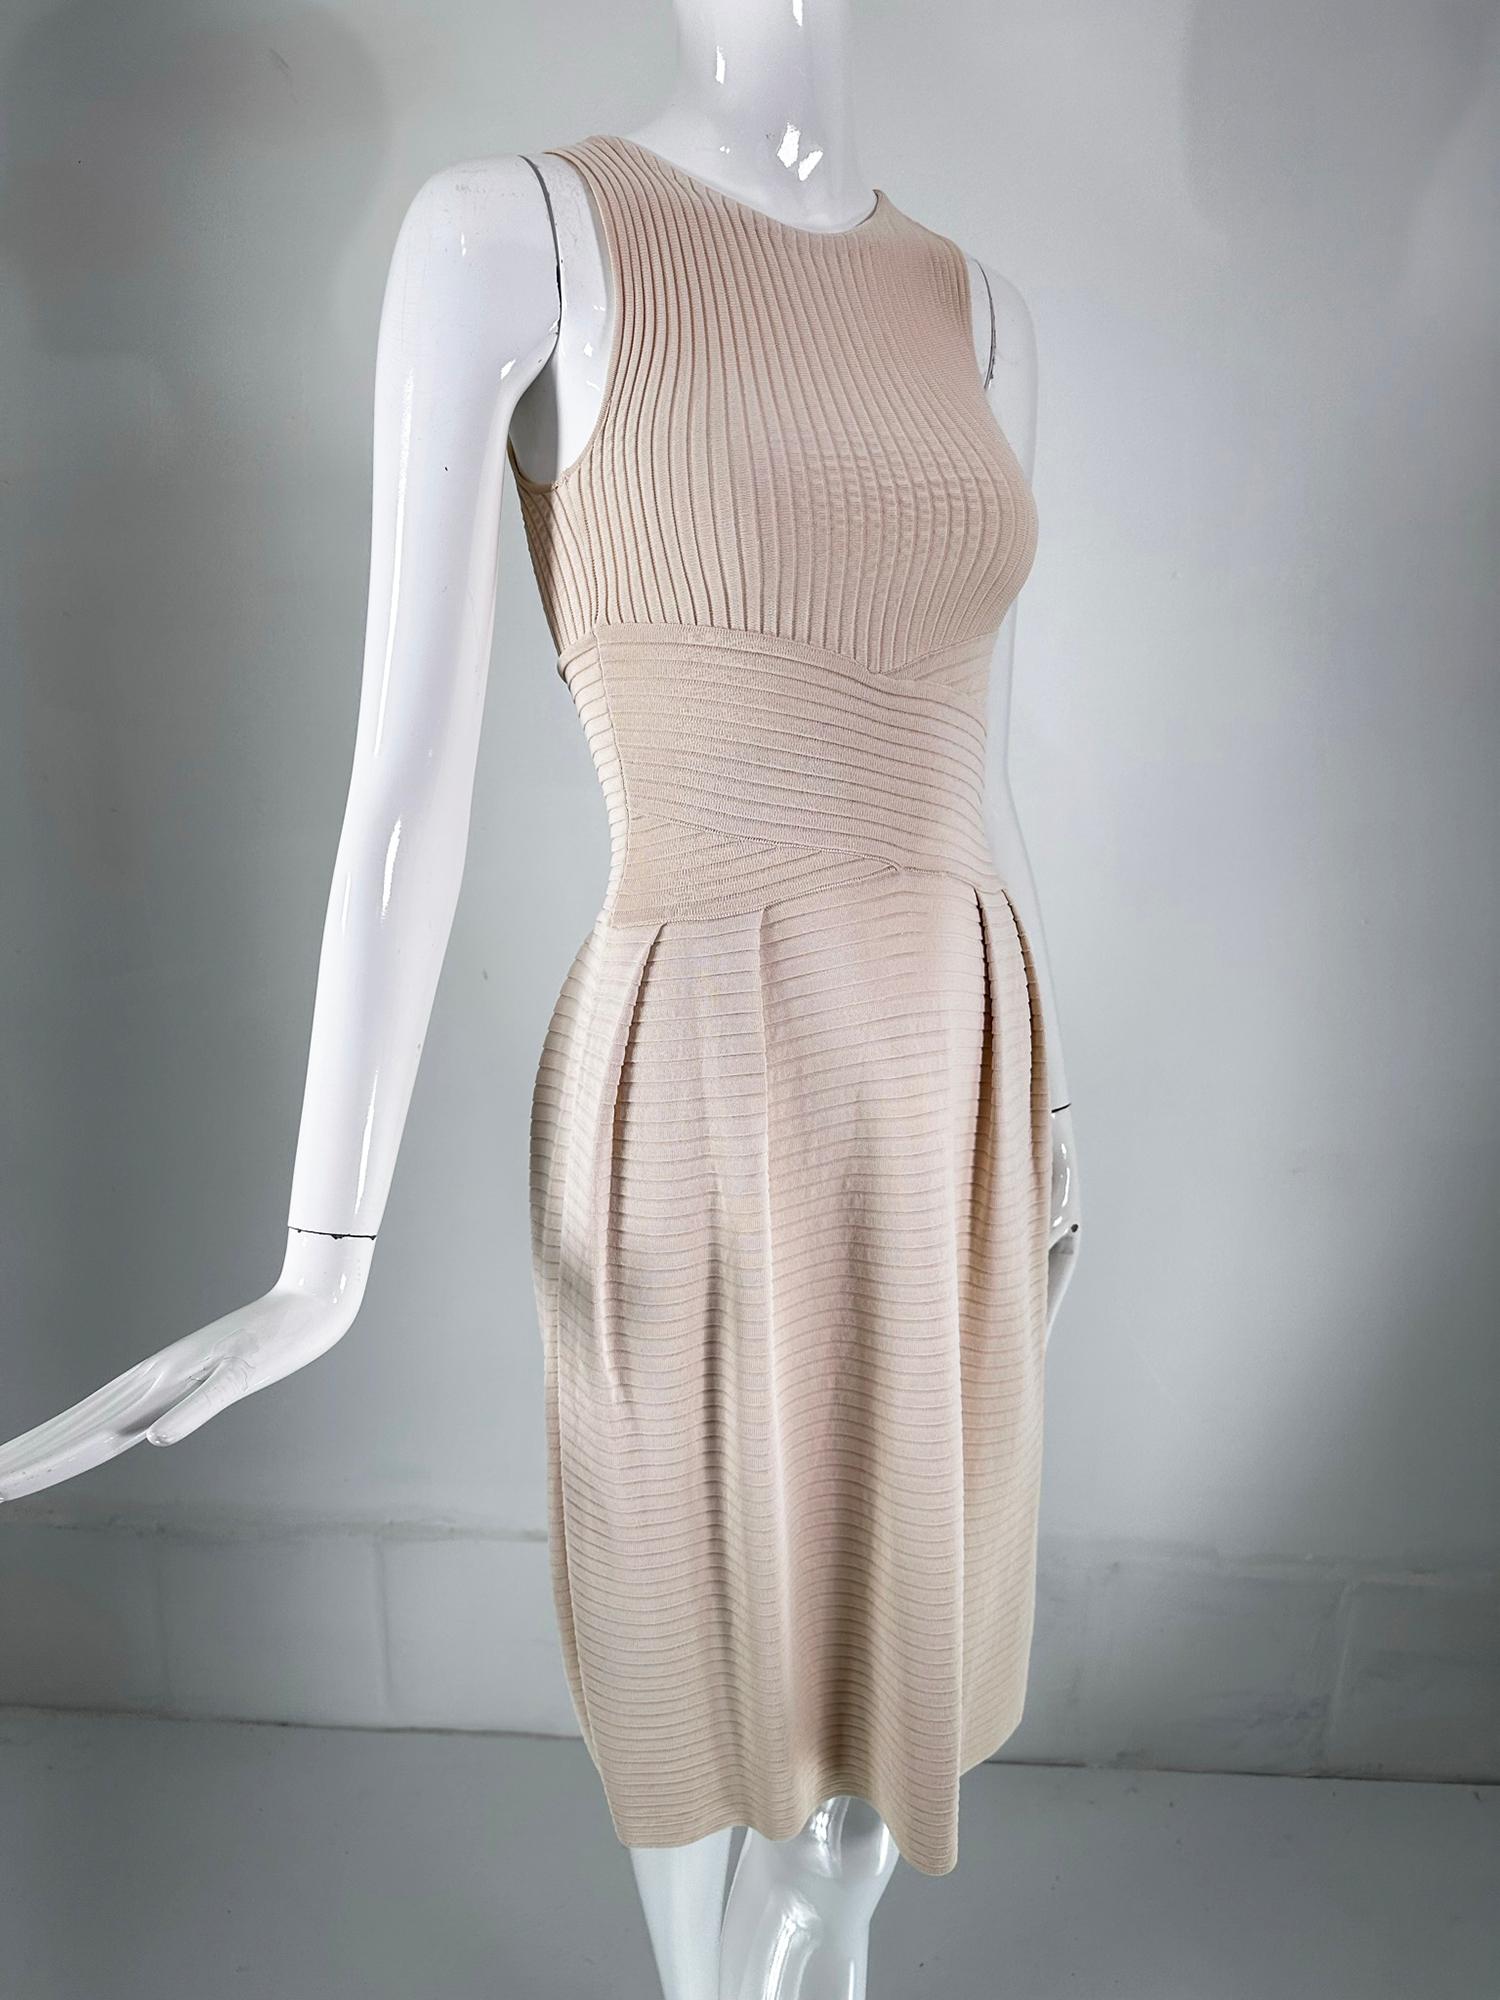 Christian Dior Paris 2010, beige silky ribbed knit dress with racer style bodice, cross ribbed waist with open pleats at the hip fronts & back giving the skirt a bell shape. The dress is unlined & closes at the side with an invisible zipper. The